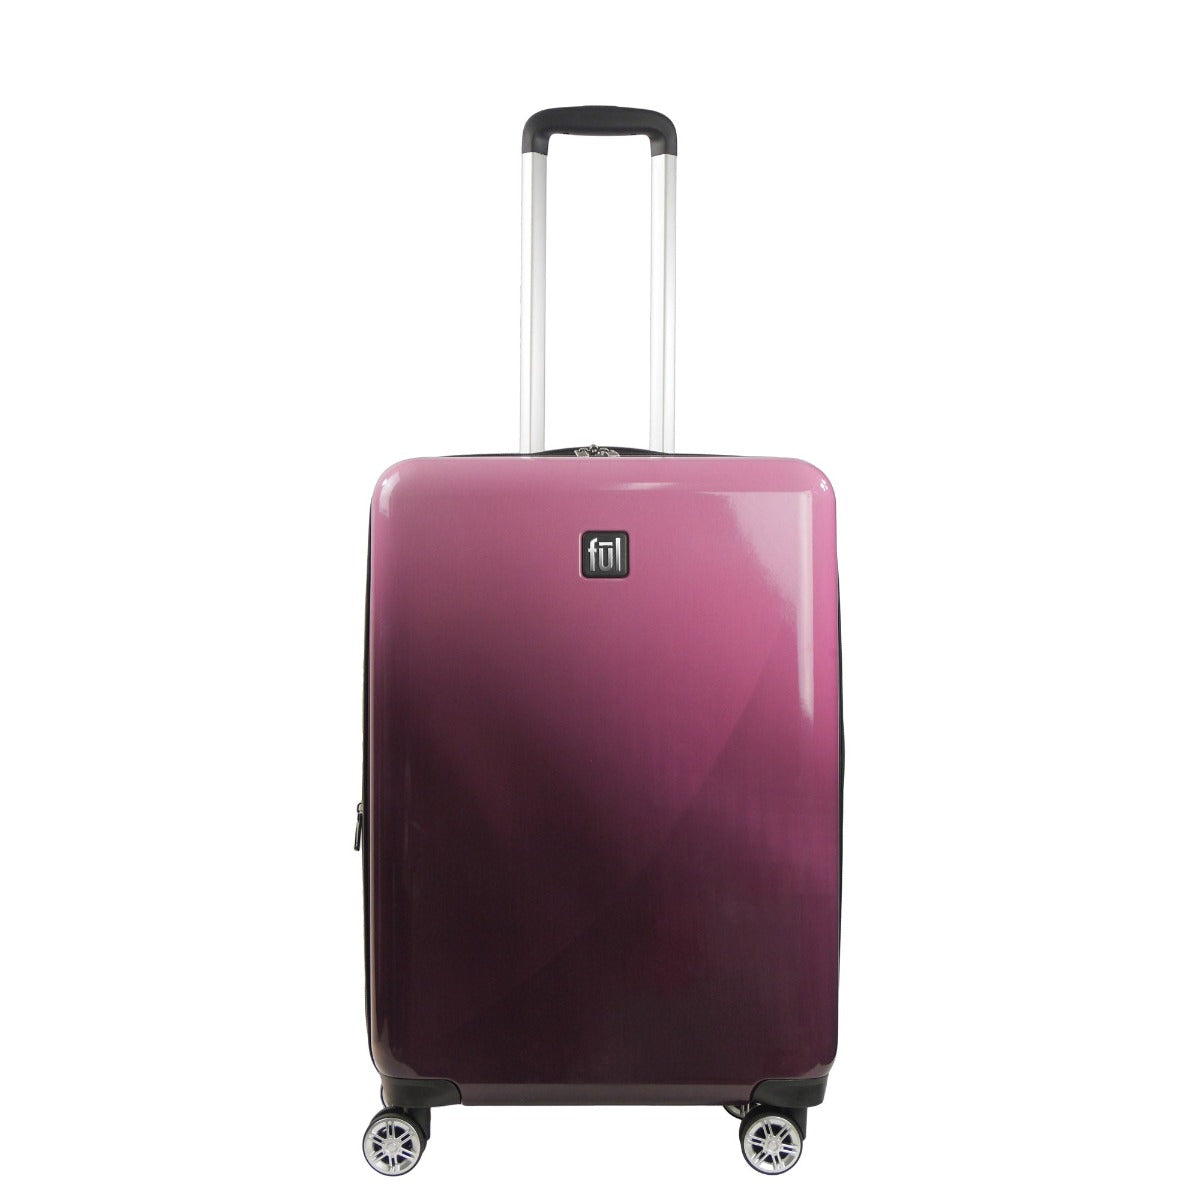 Ful Impulse Ombre Hardside Suitcase 26 inch Luggage Pink Purple Fade 360 degree spinner wheels 